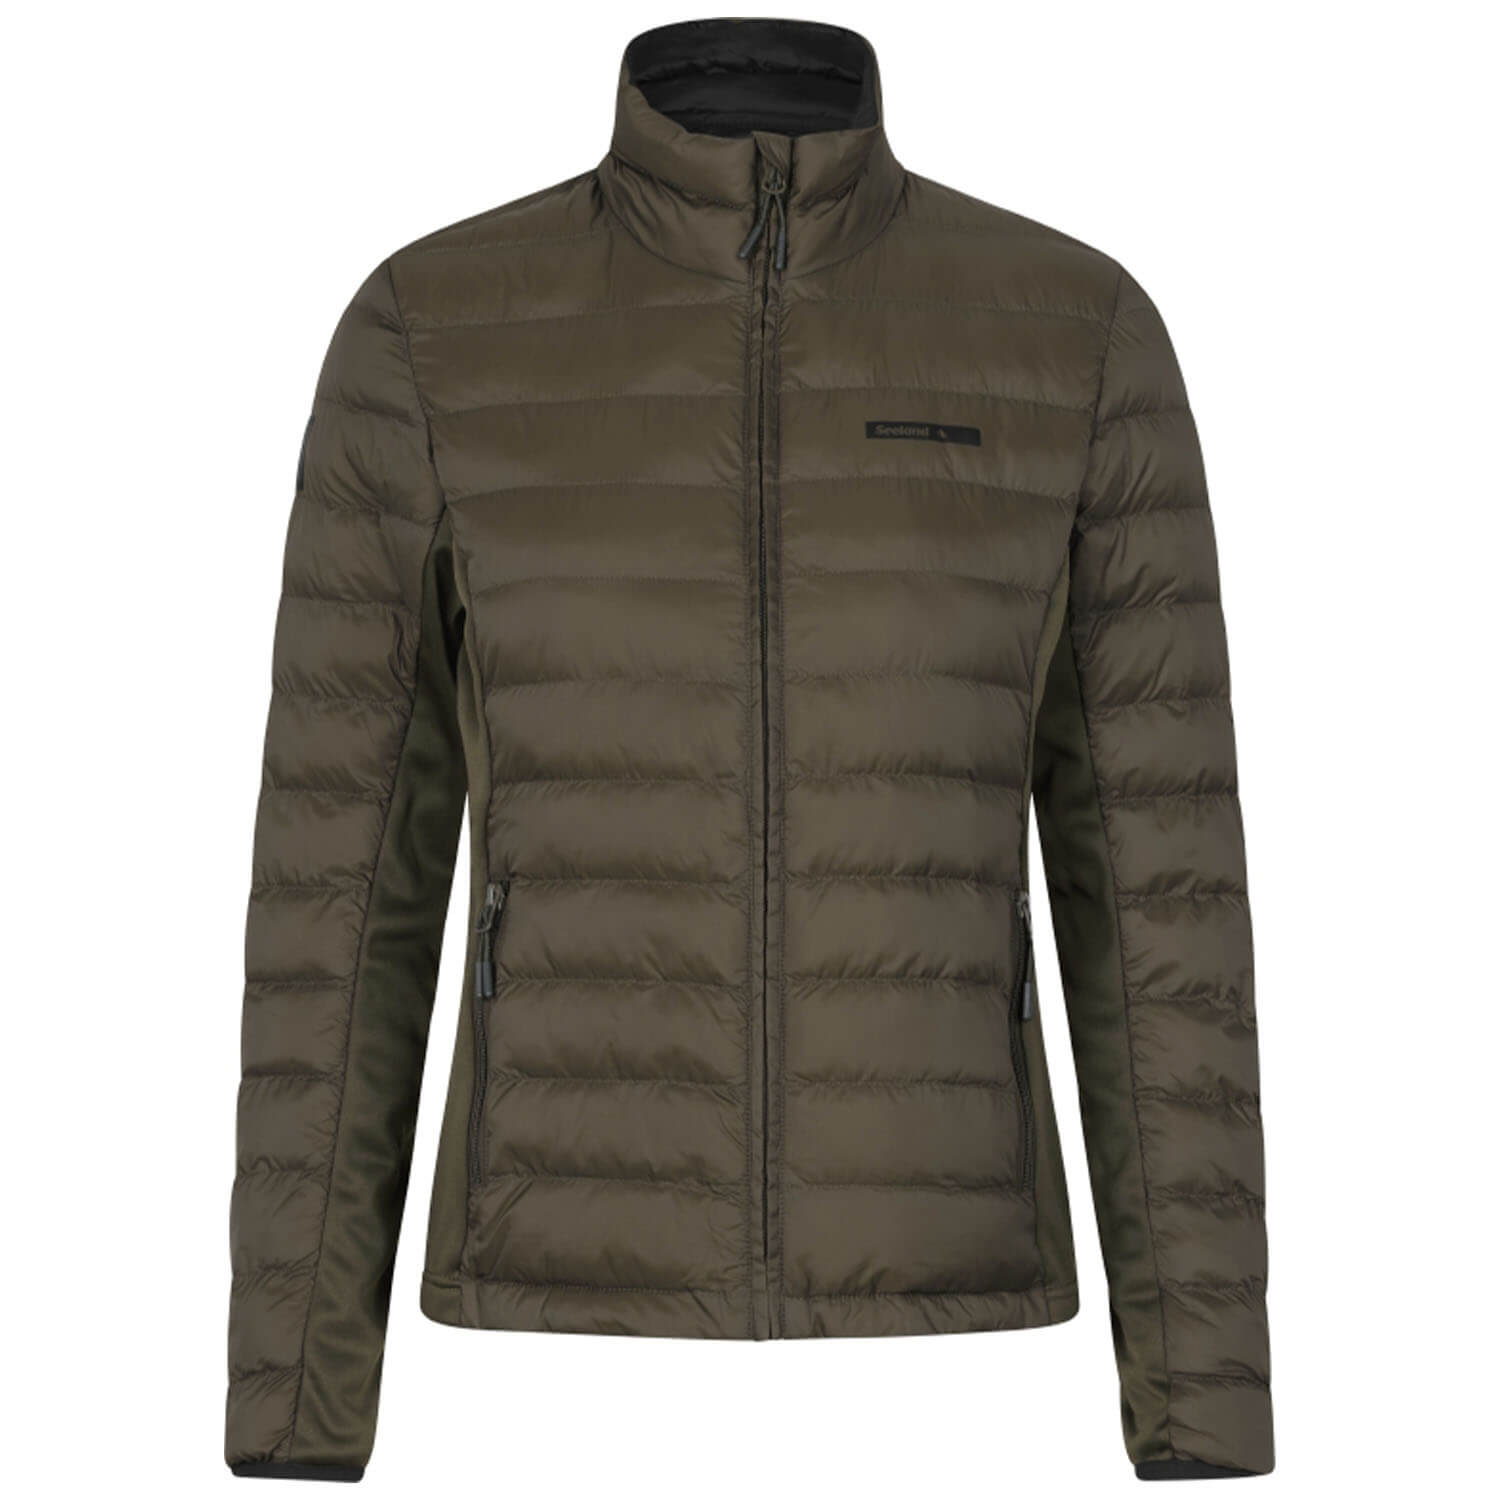 Seeland women quilted jacket therma (Light Pine) - Women's Hunting Clothing 